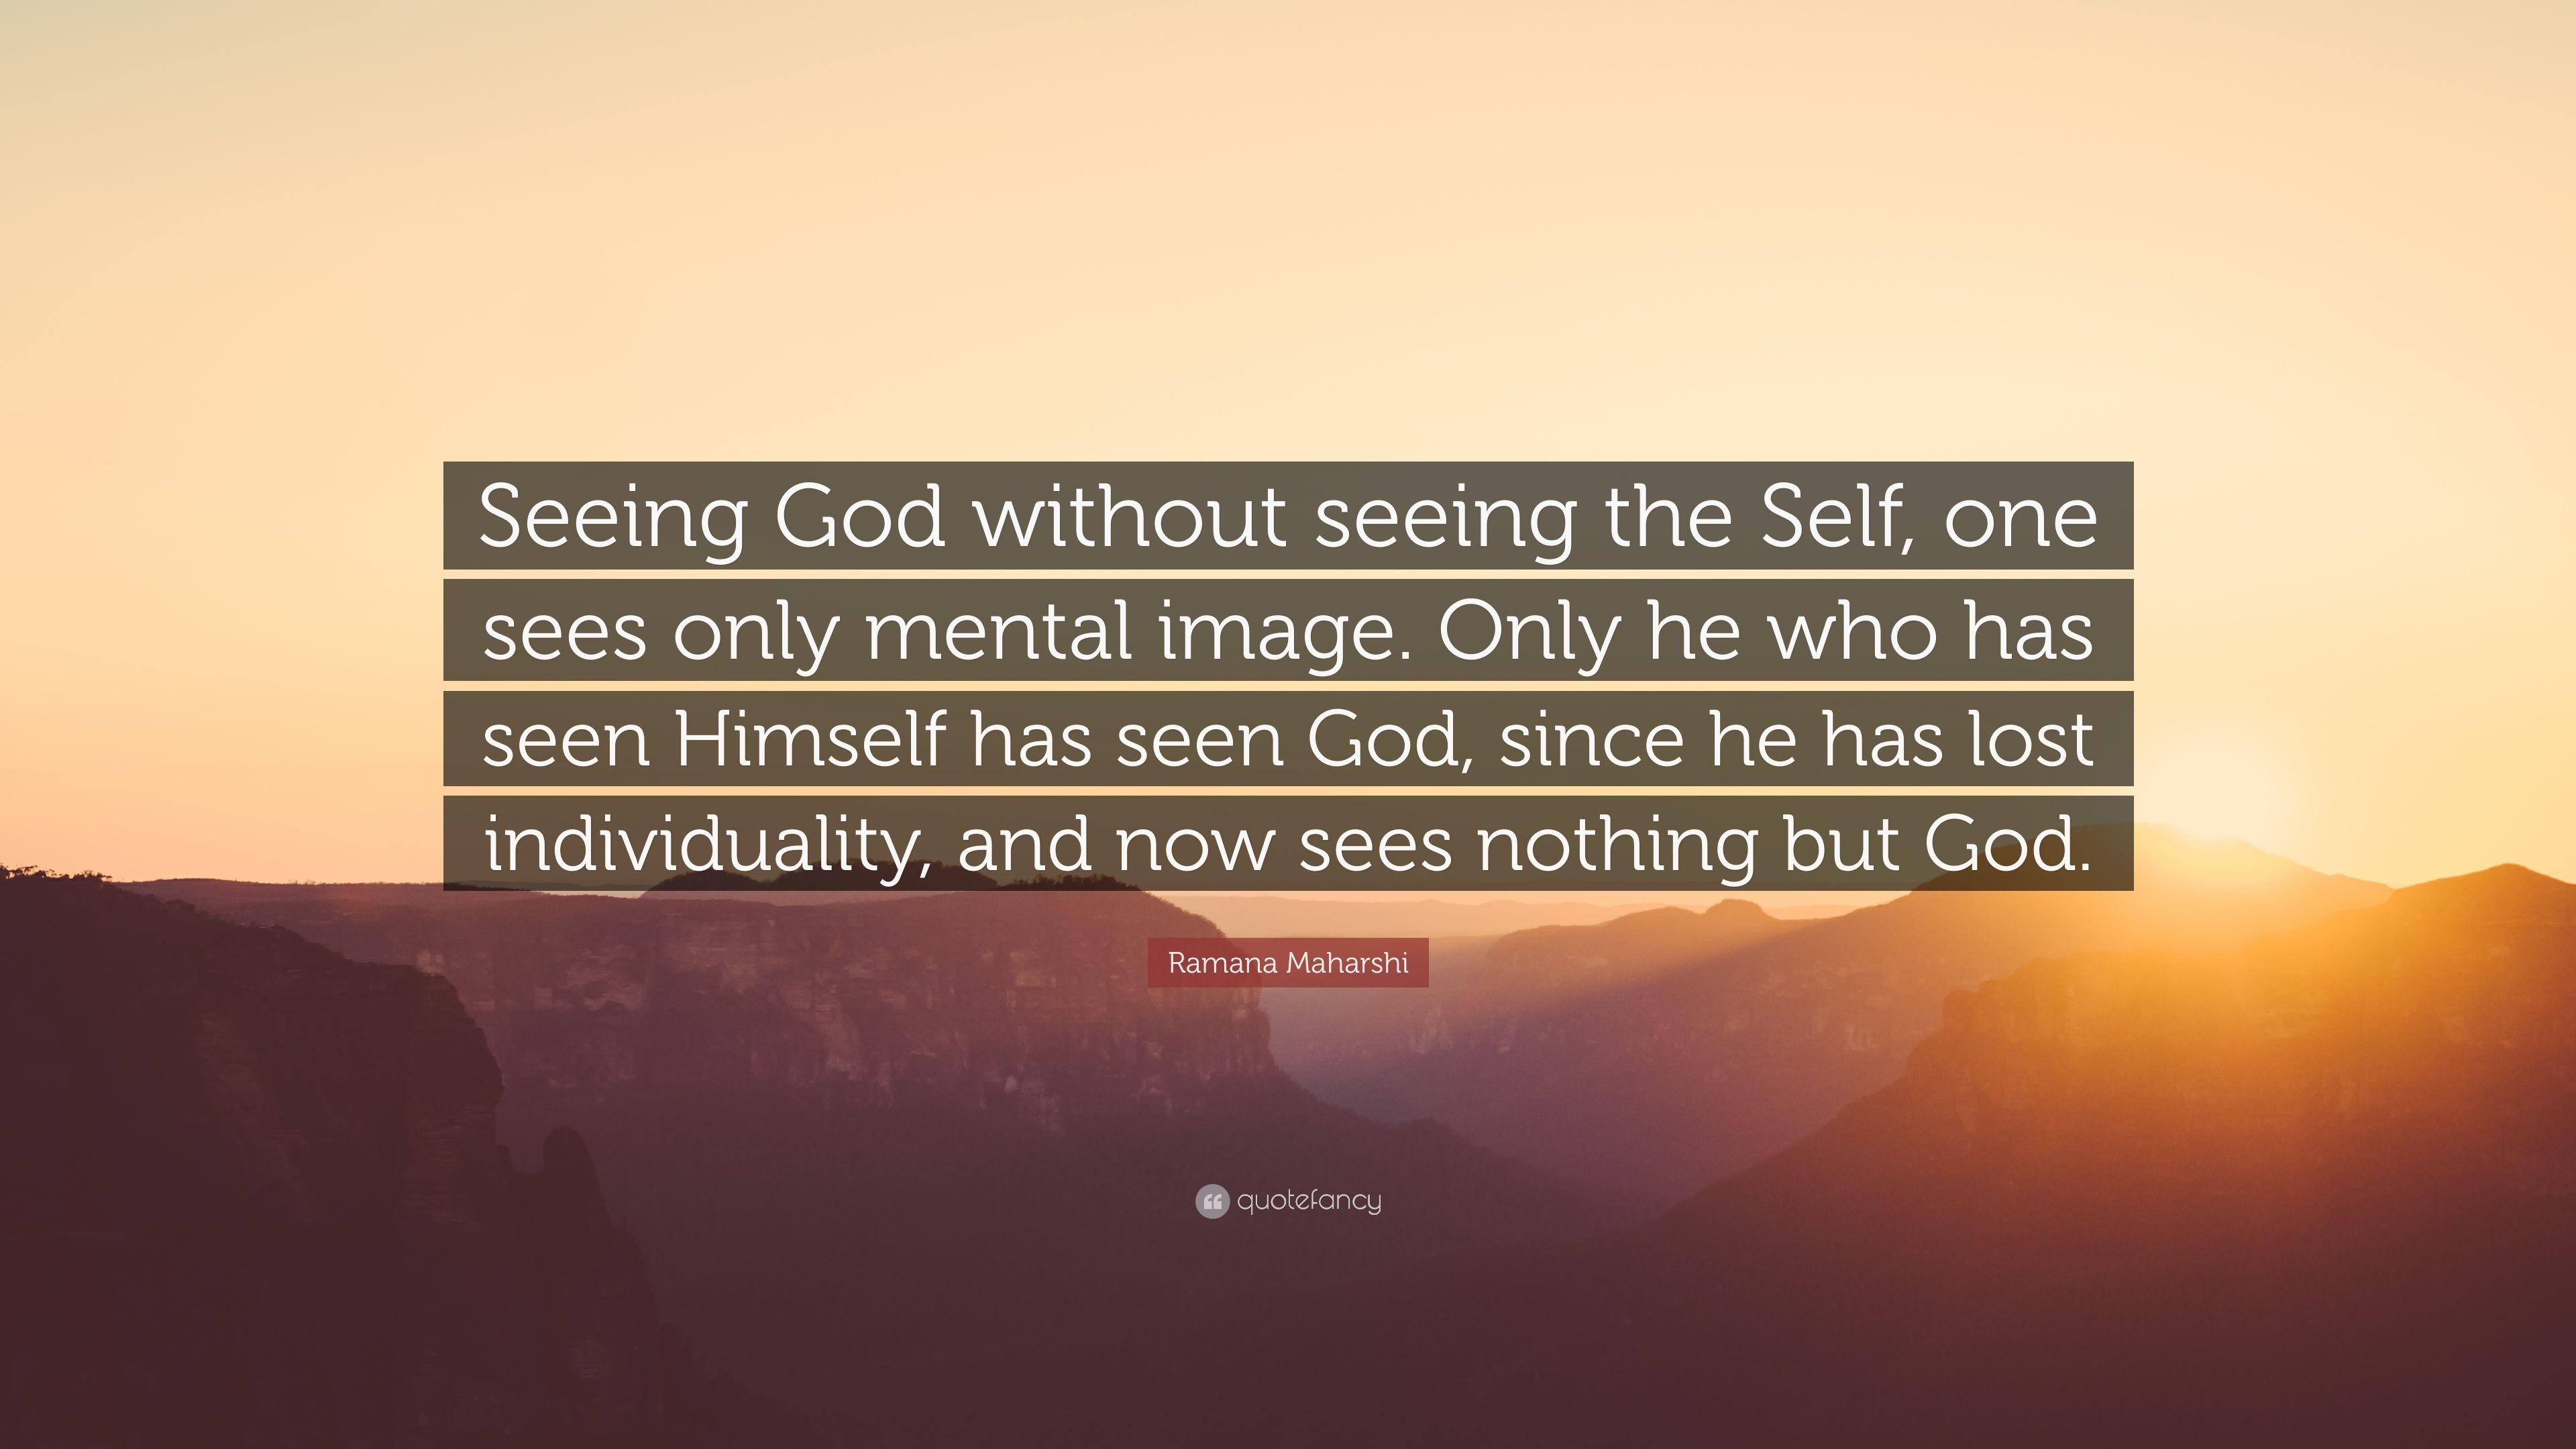 Ramana Maharshi Quote: “Seeing God without seeing the Self, one sees